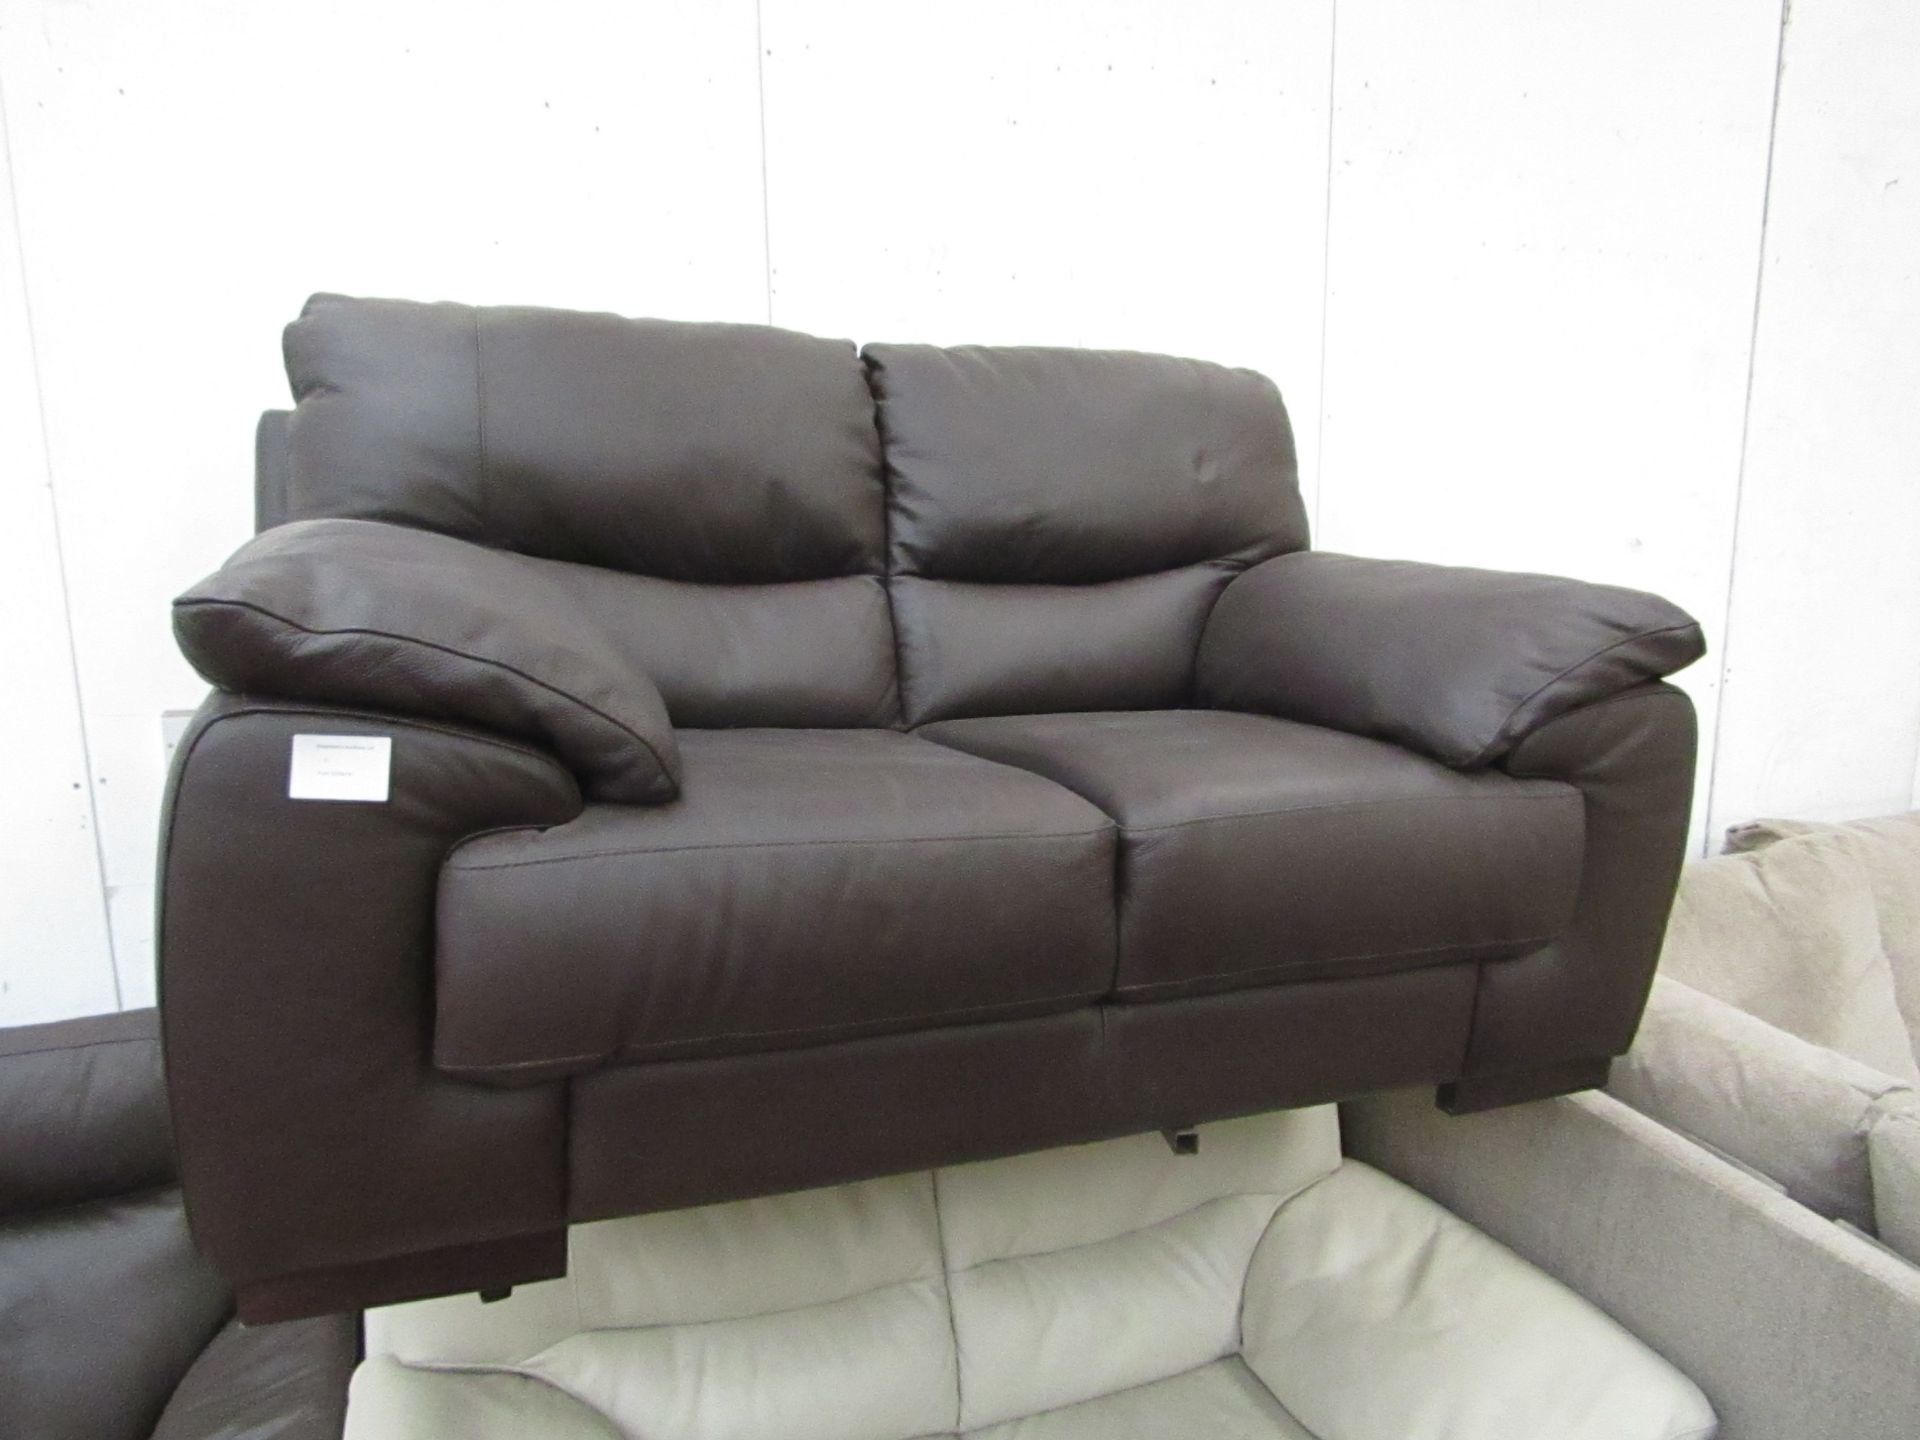 2 seater Brown Leather sofa.